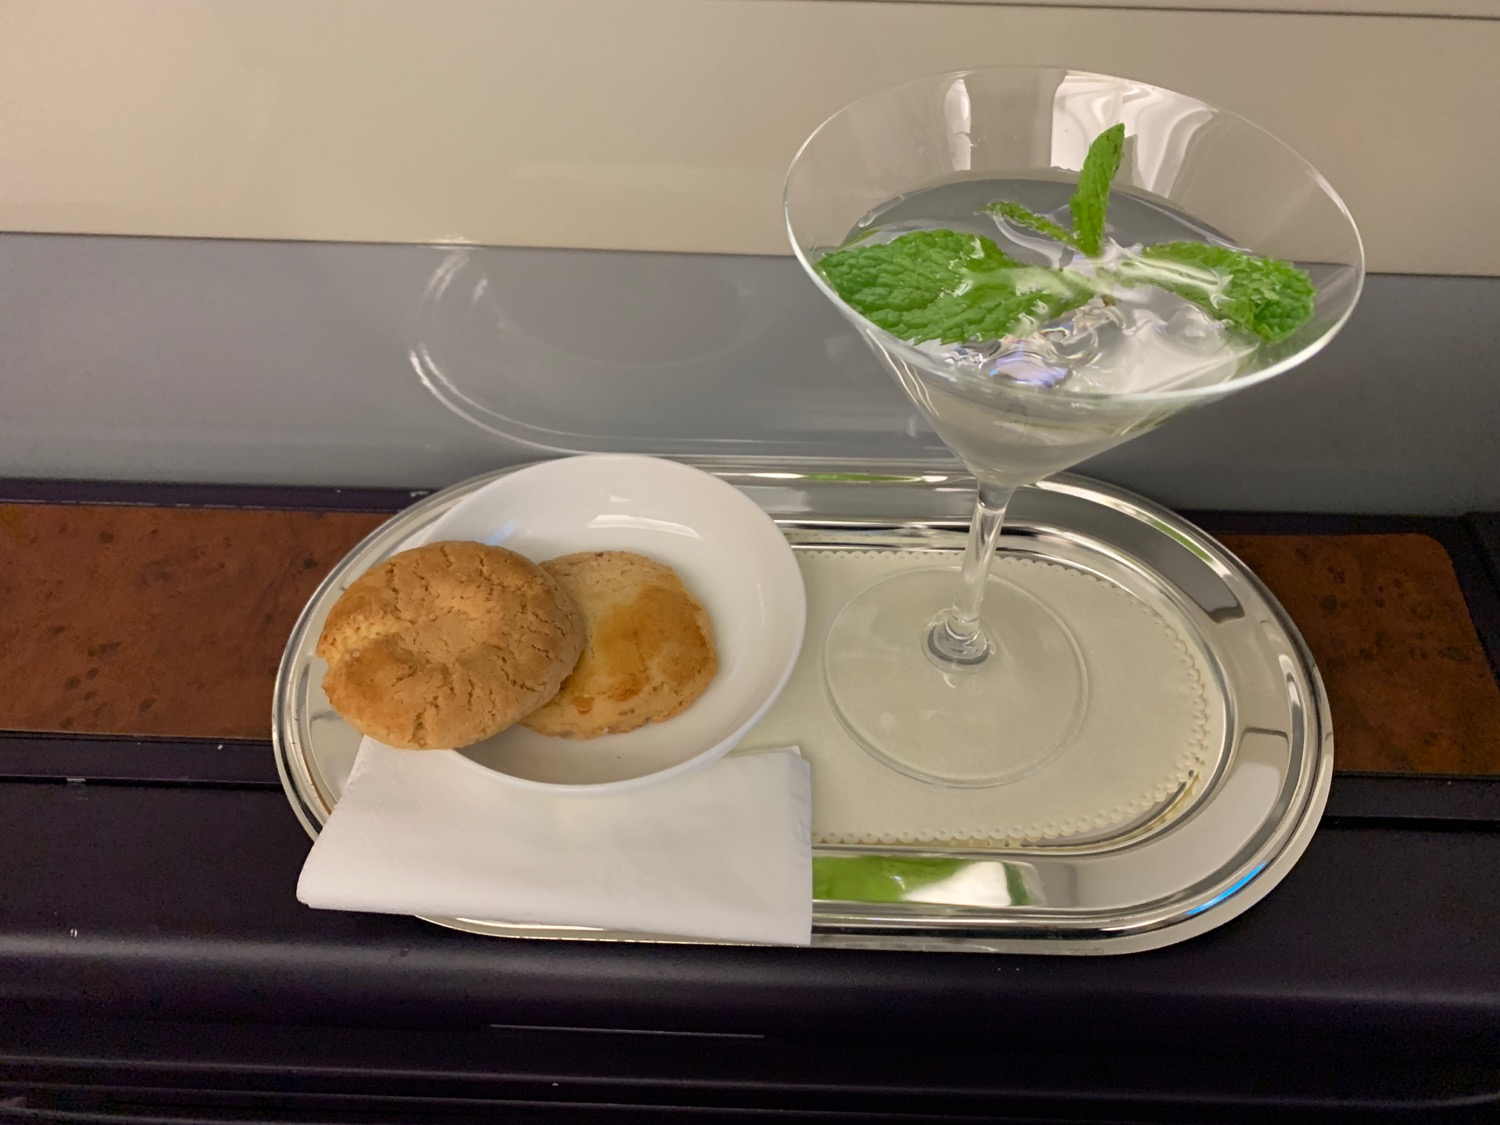 a plate of cookies and a martini glass on a tray